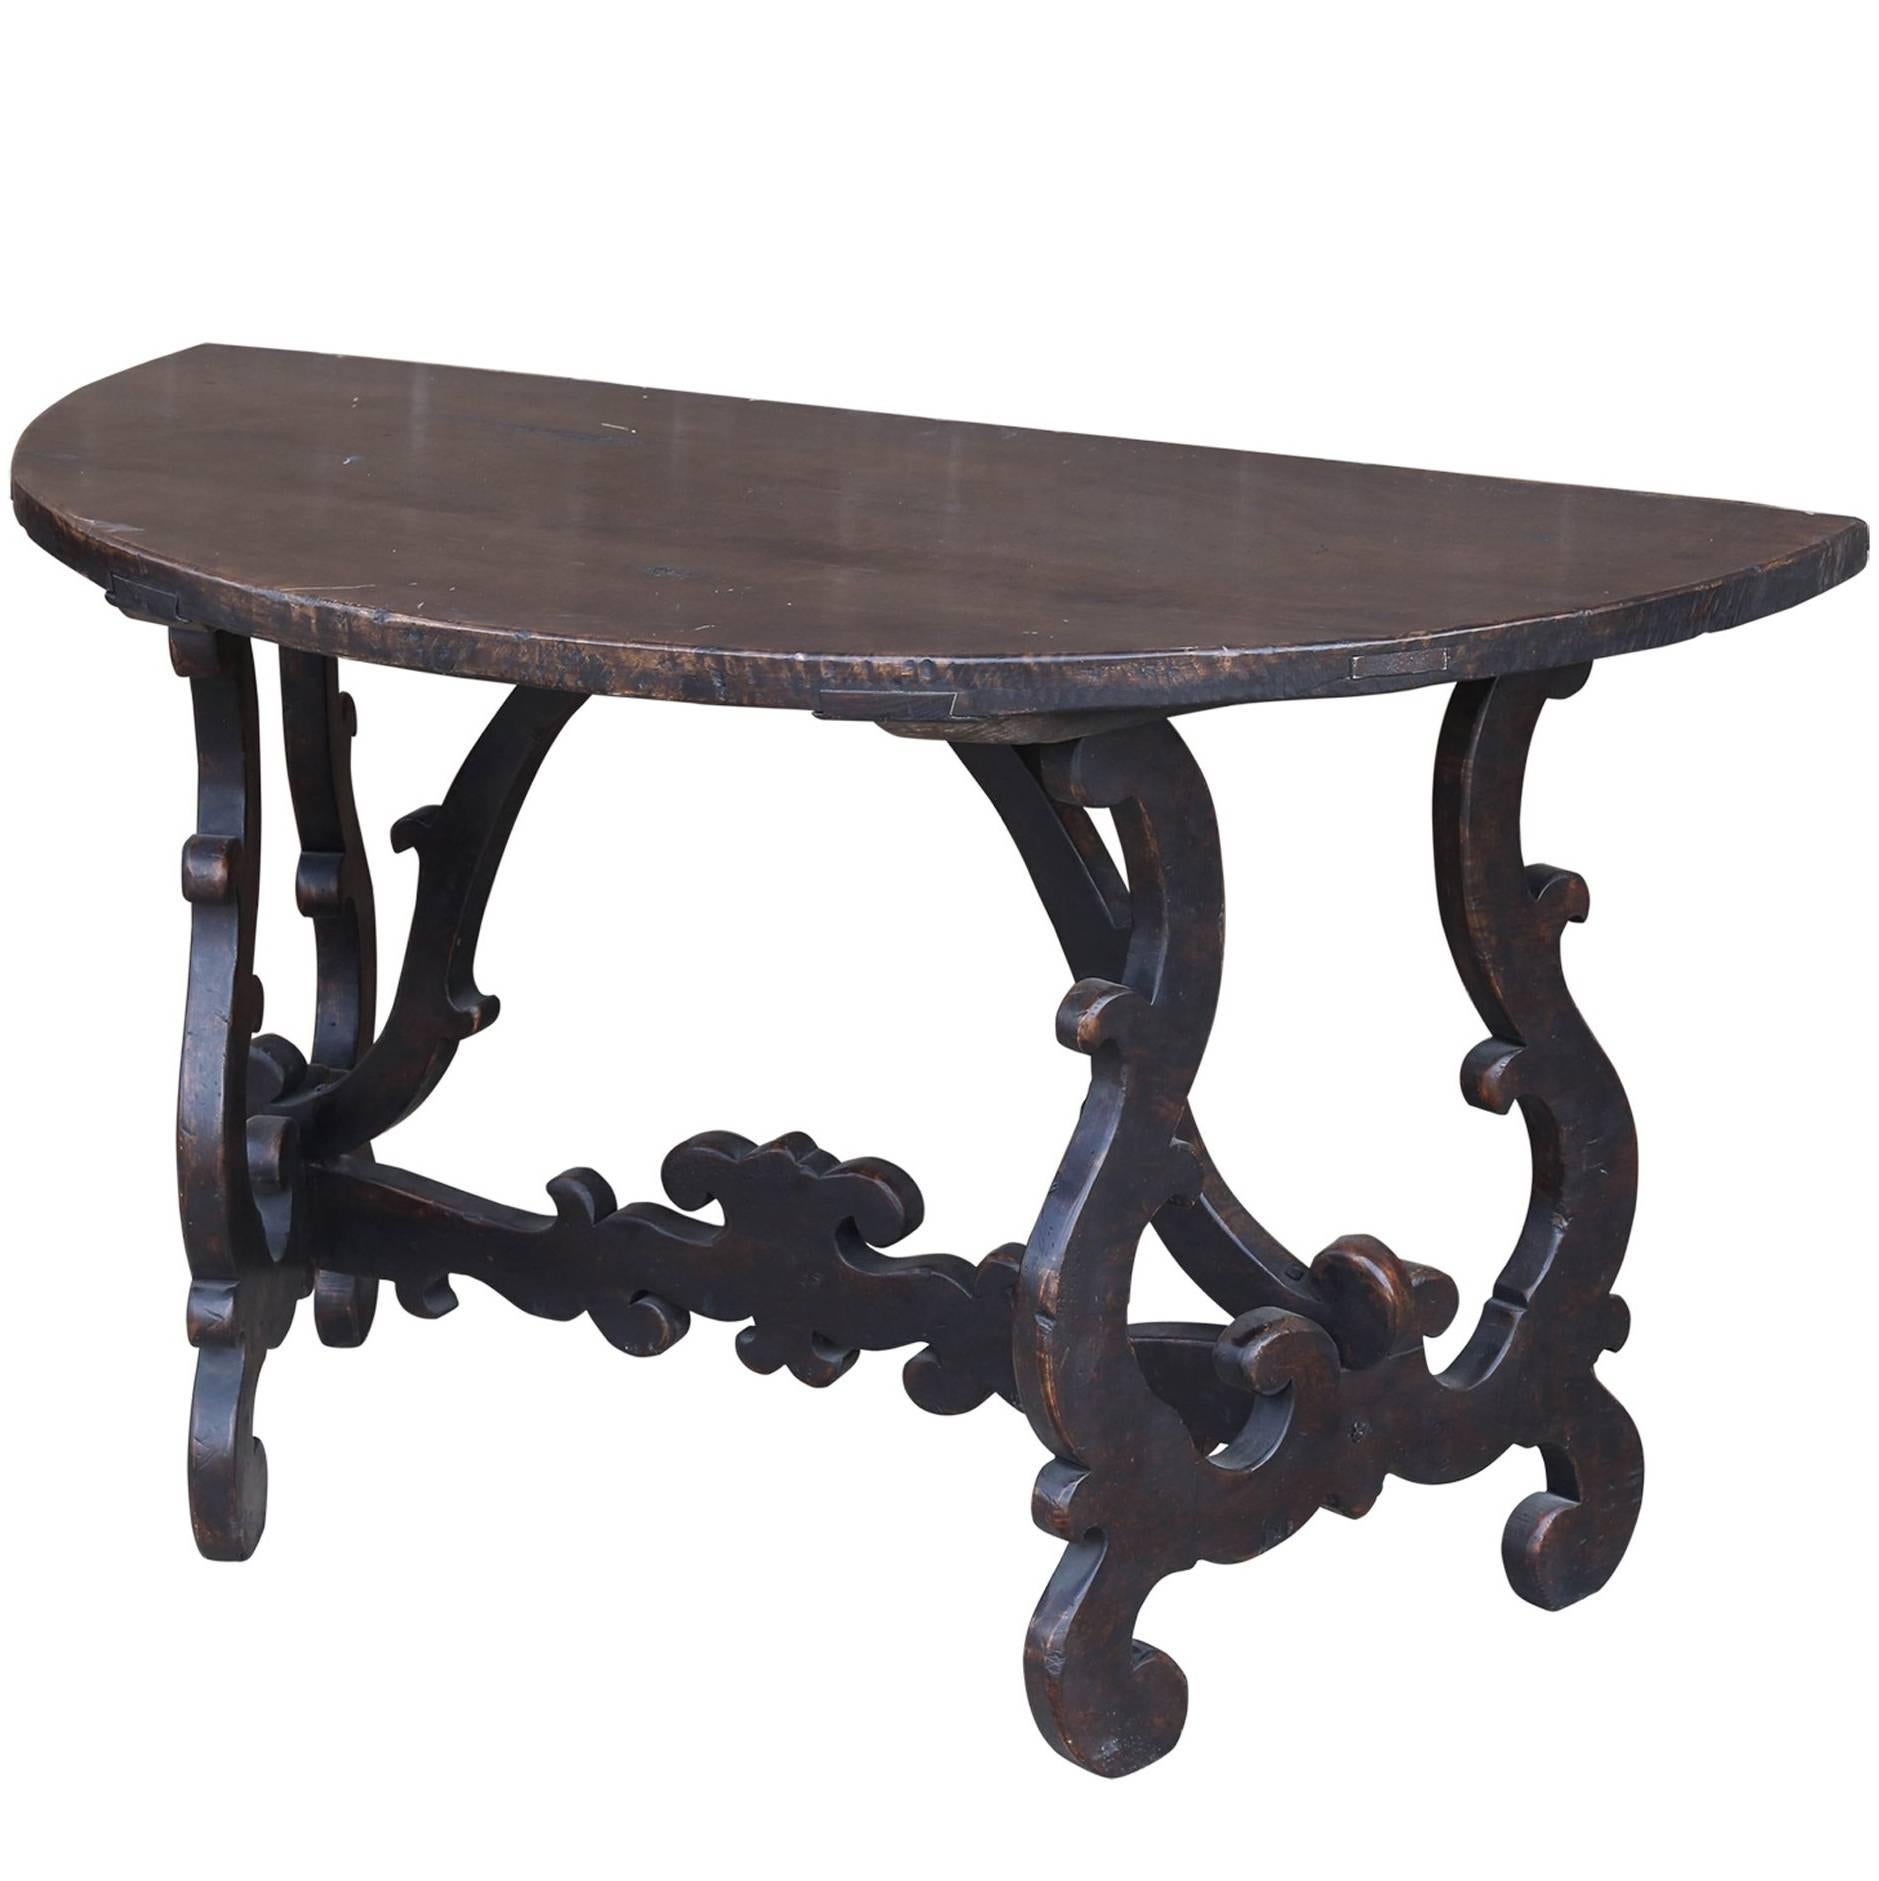 Italian Walnut Demilune Table from the 19th Century